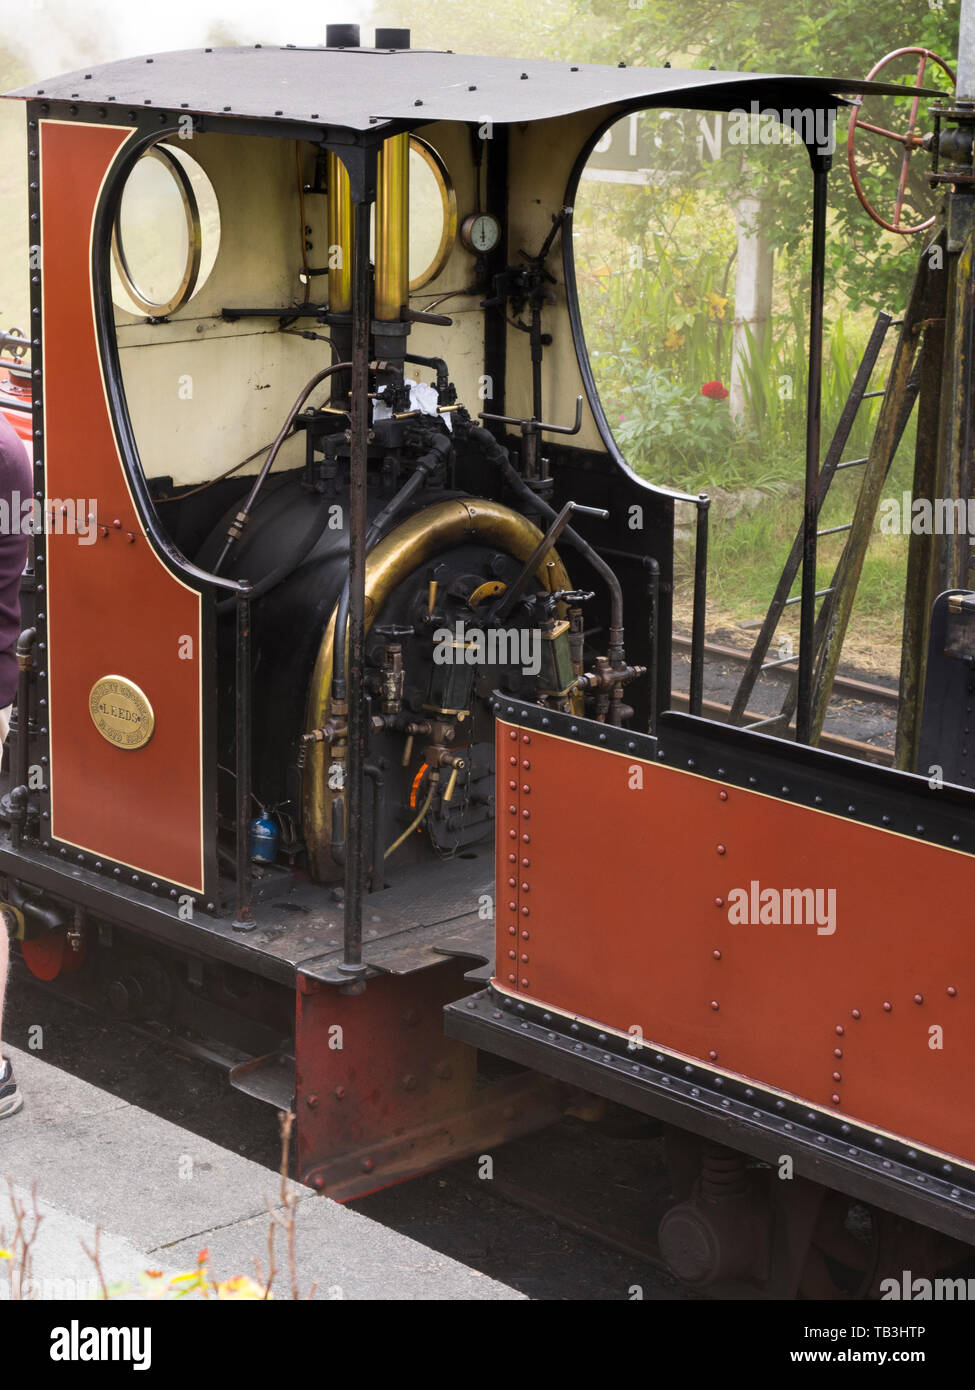 Steam engine at Lauceston steam railway, Covertcoat is a 0-4-0ST ‘Quarry Hunslet’ built in 1898 by the Hunslet Engine Company of Leeds, Cornwall, UK Stock Photo